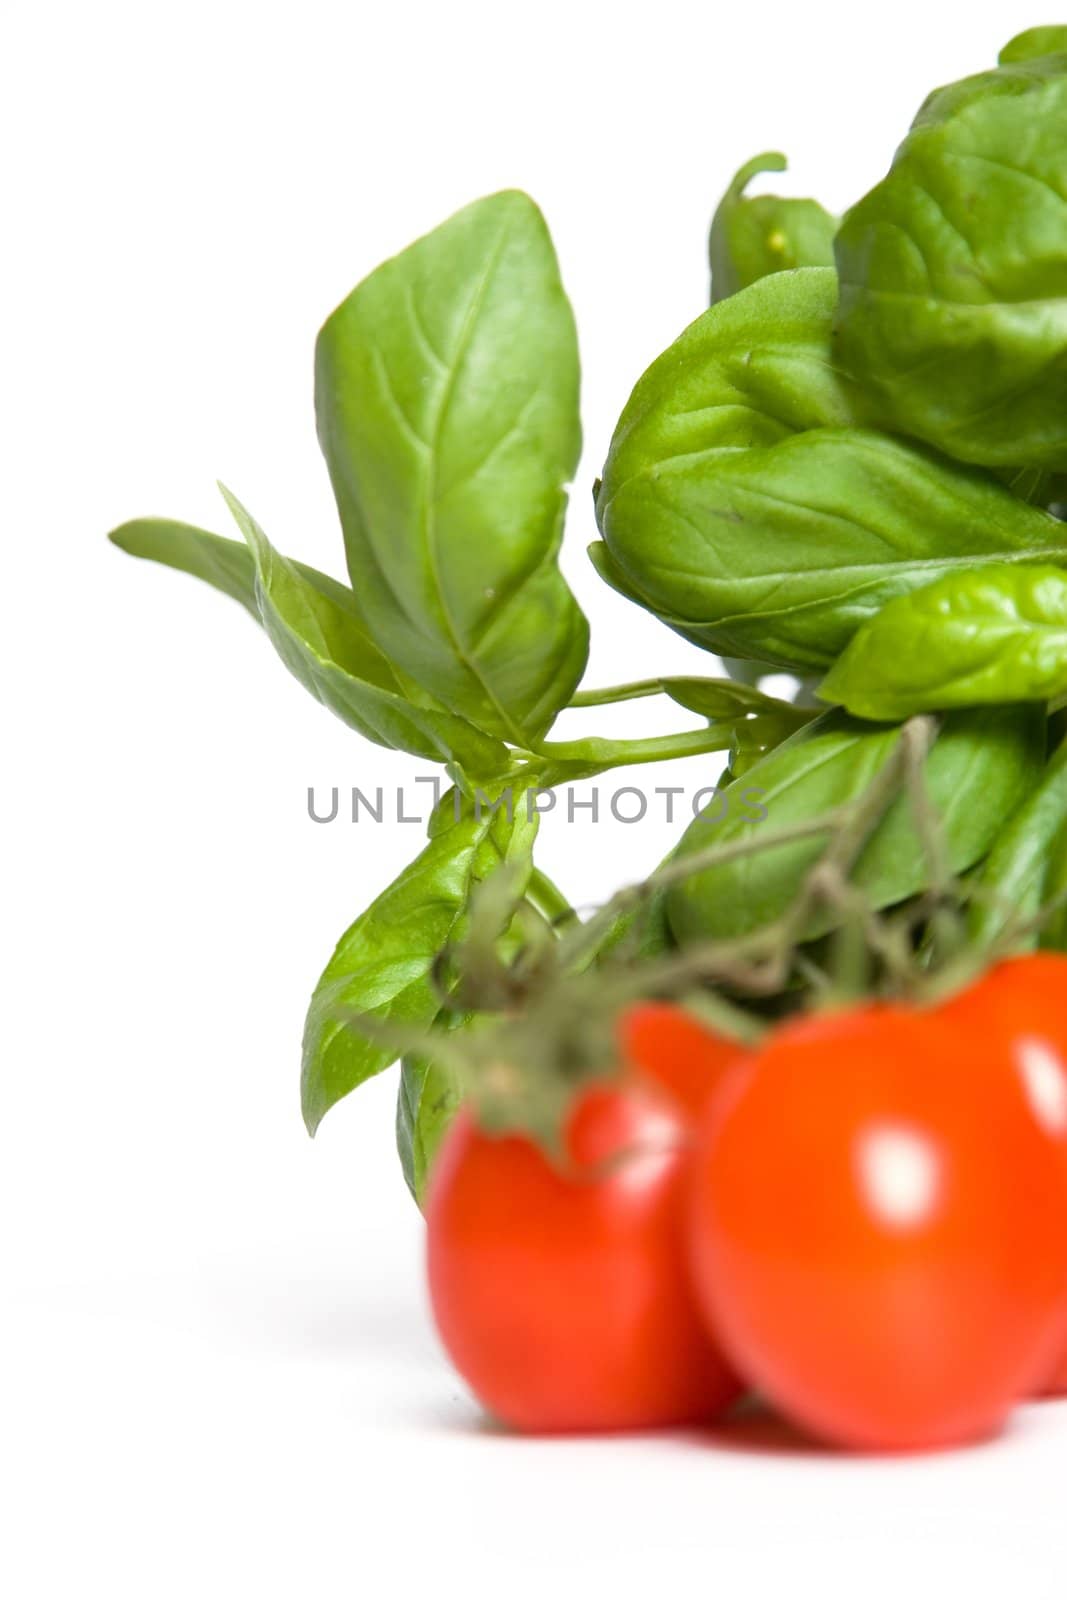 tomato and basil, separate on white